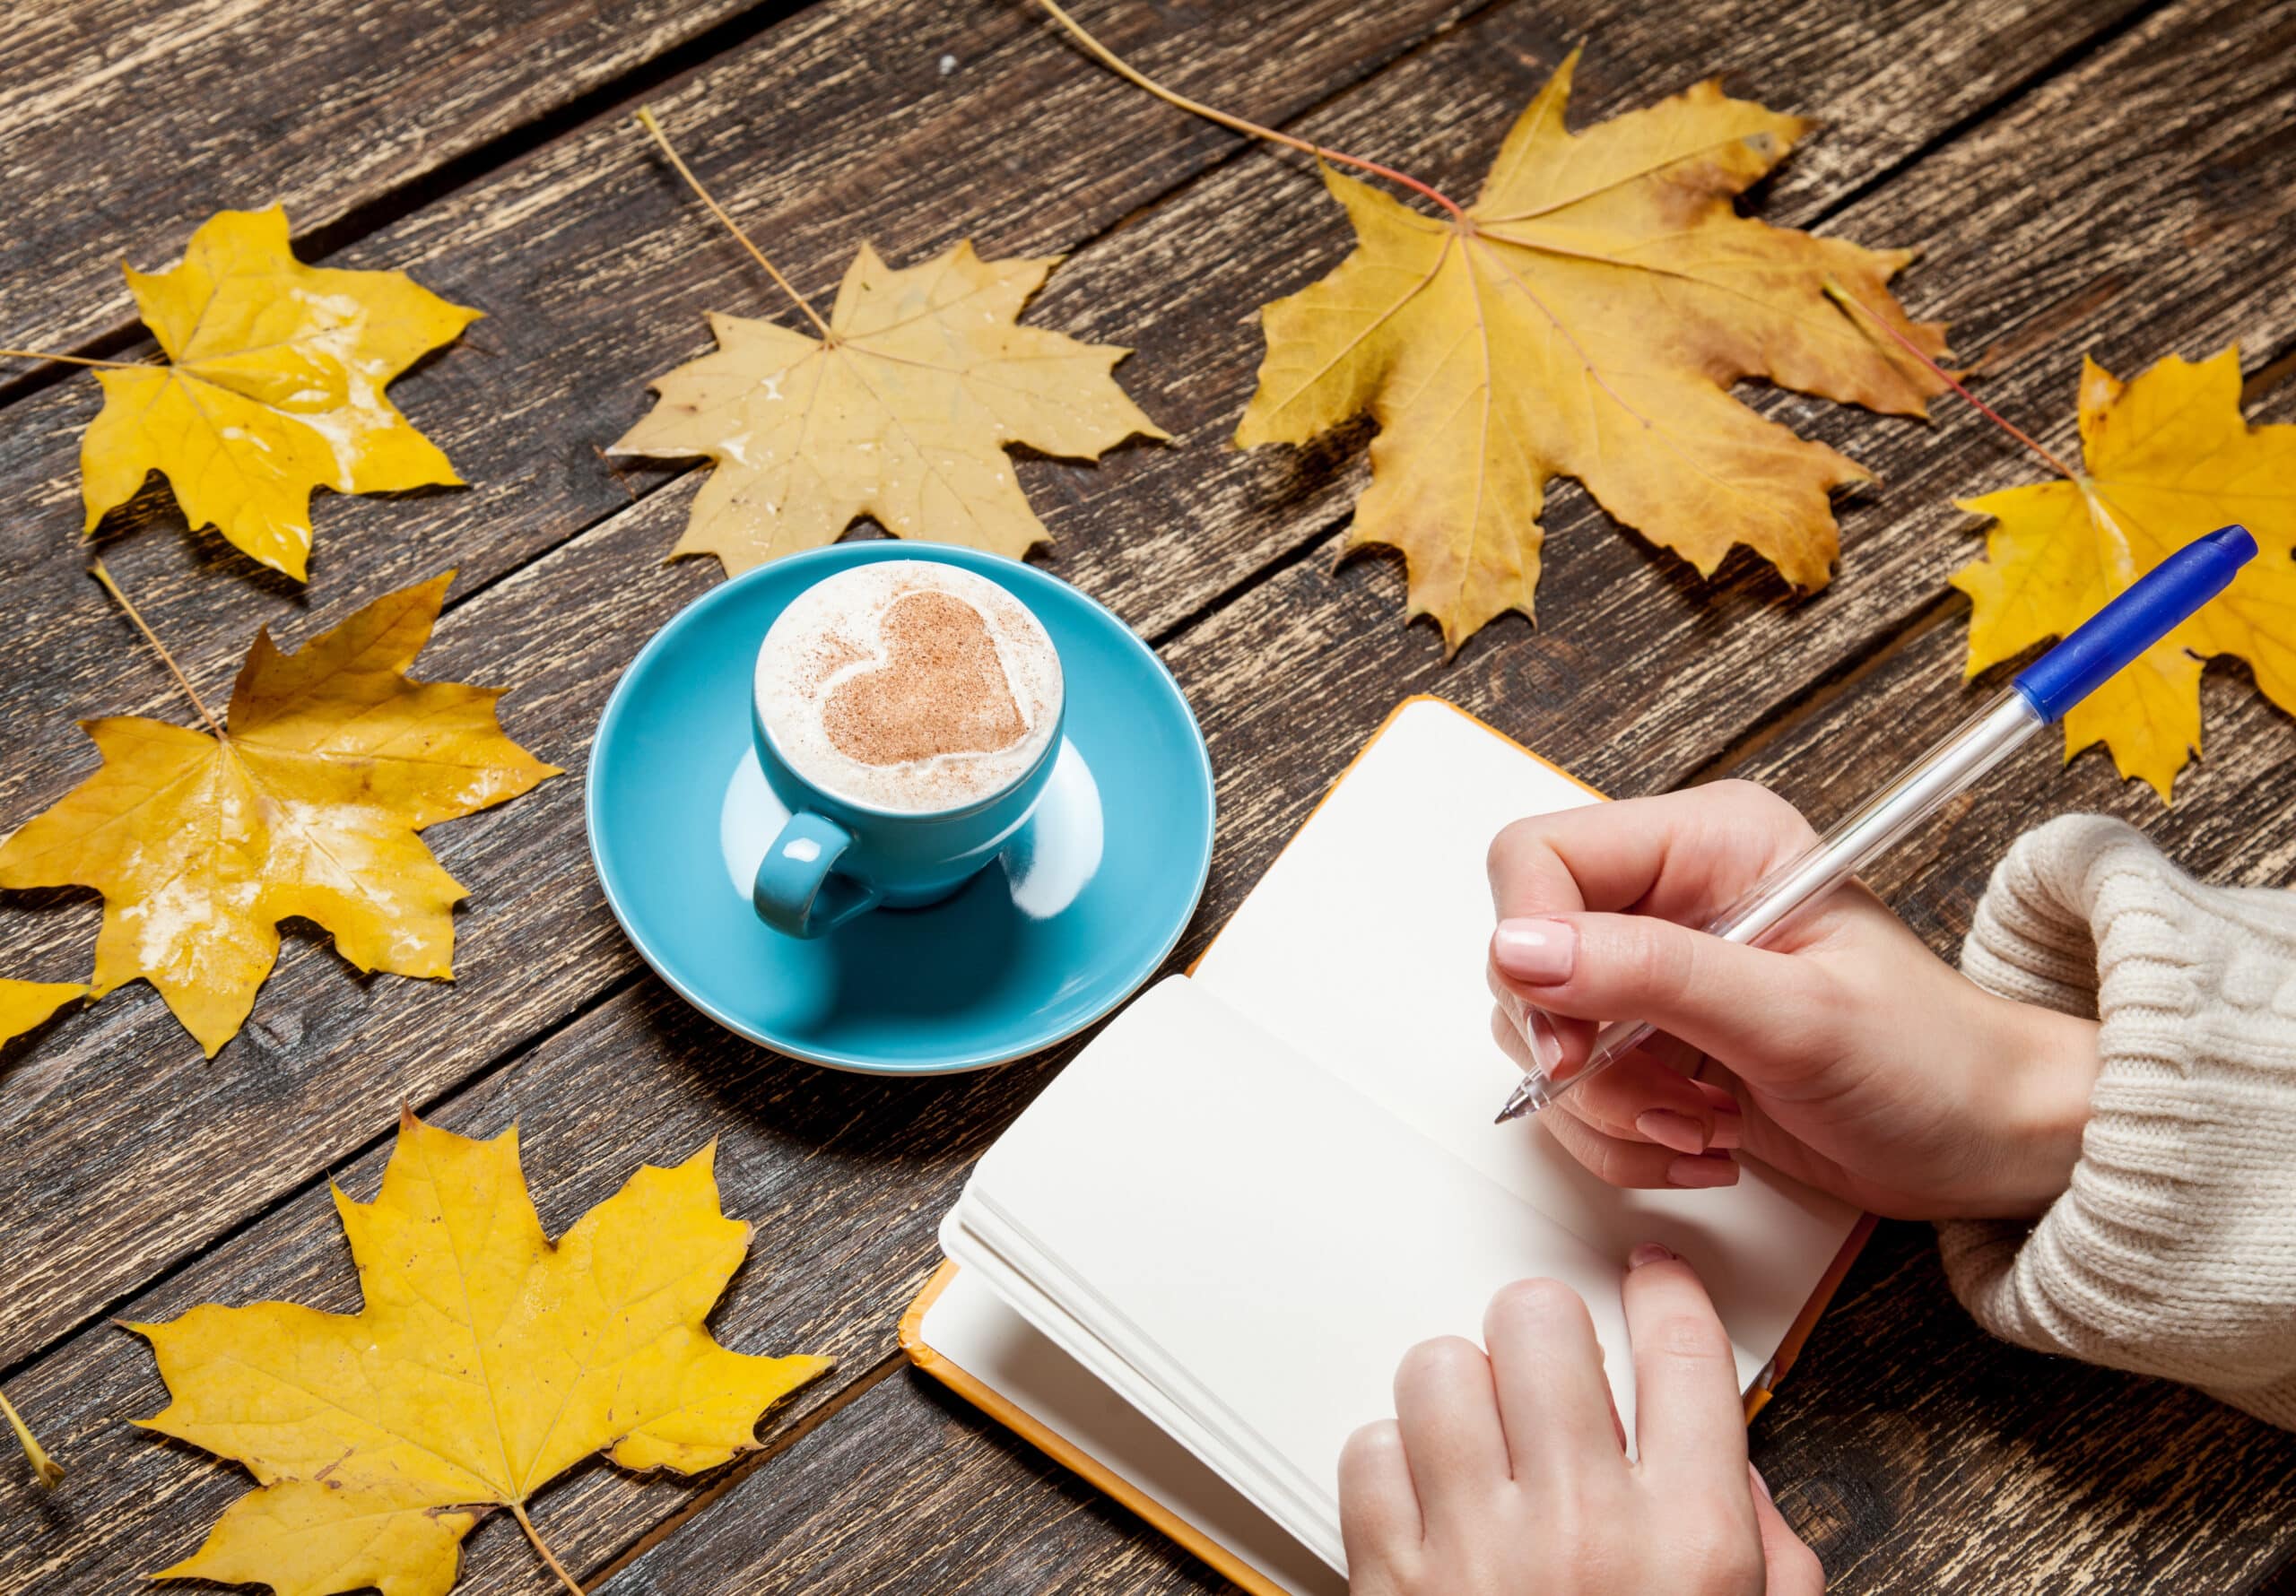 Female hand writing in notebook near cup of coffee on wood table with maple leaves